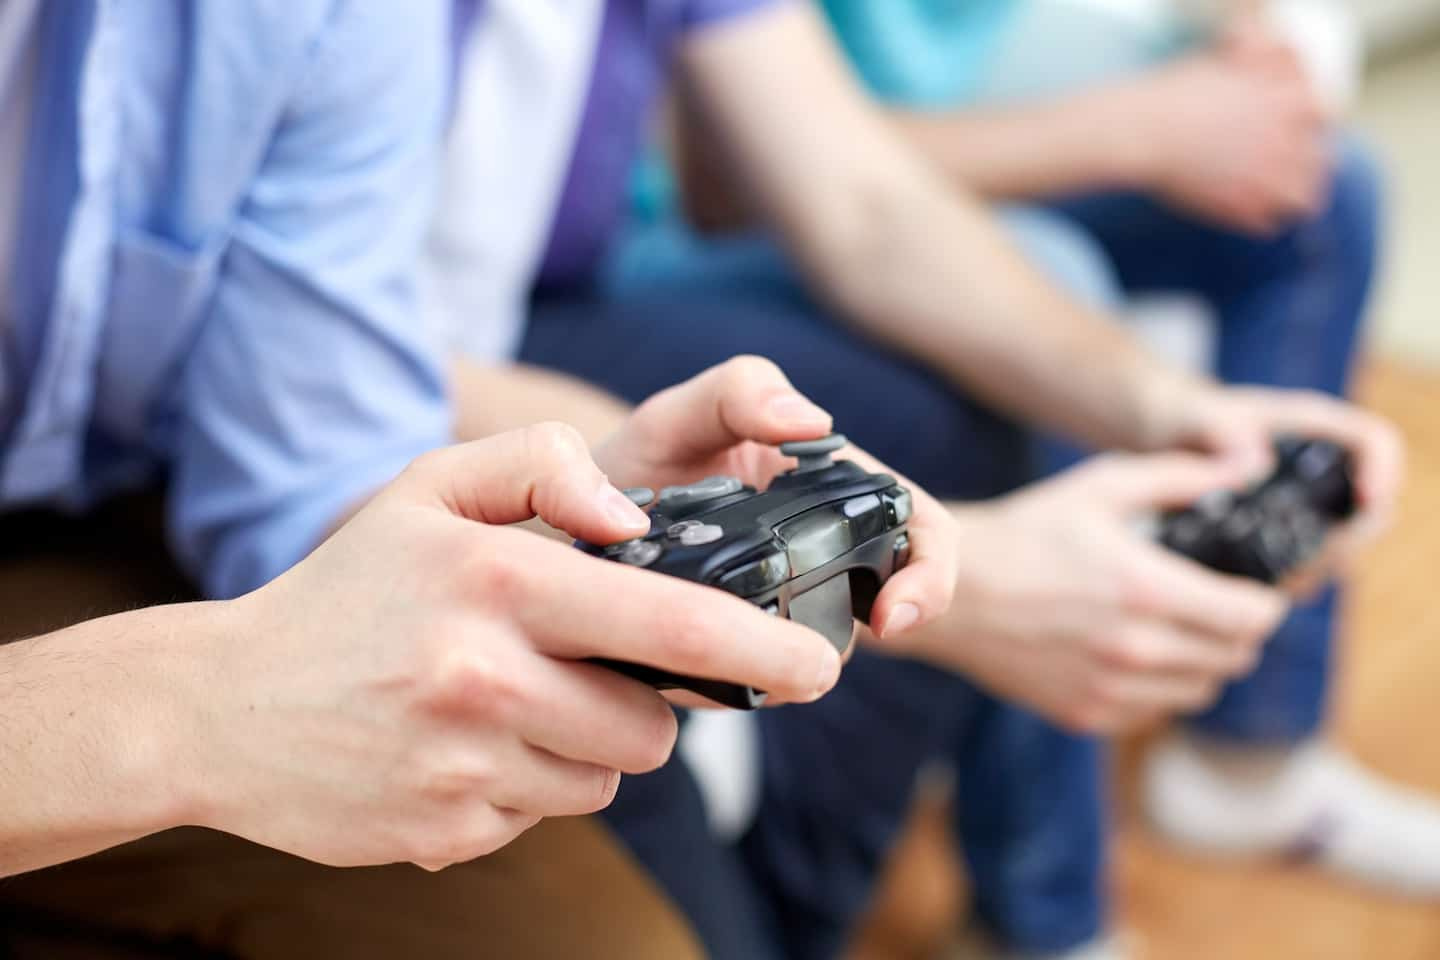 China: First authorizations for foreign video games for 18 months